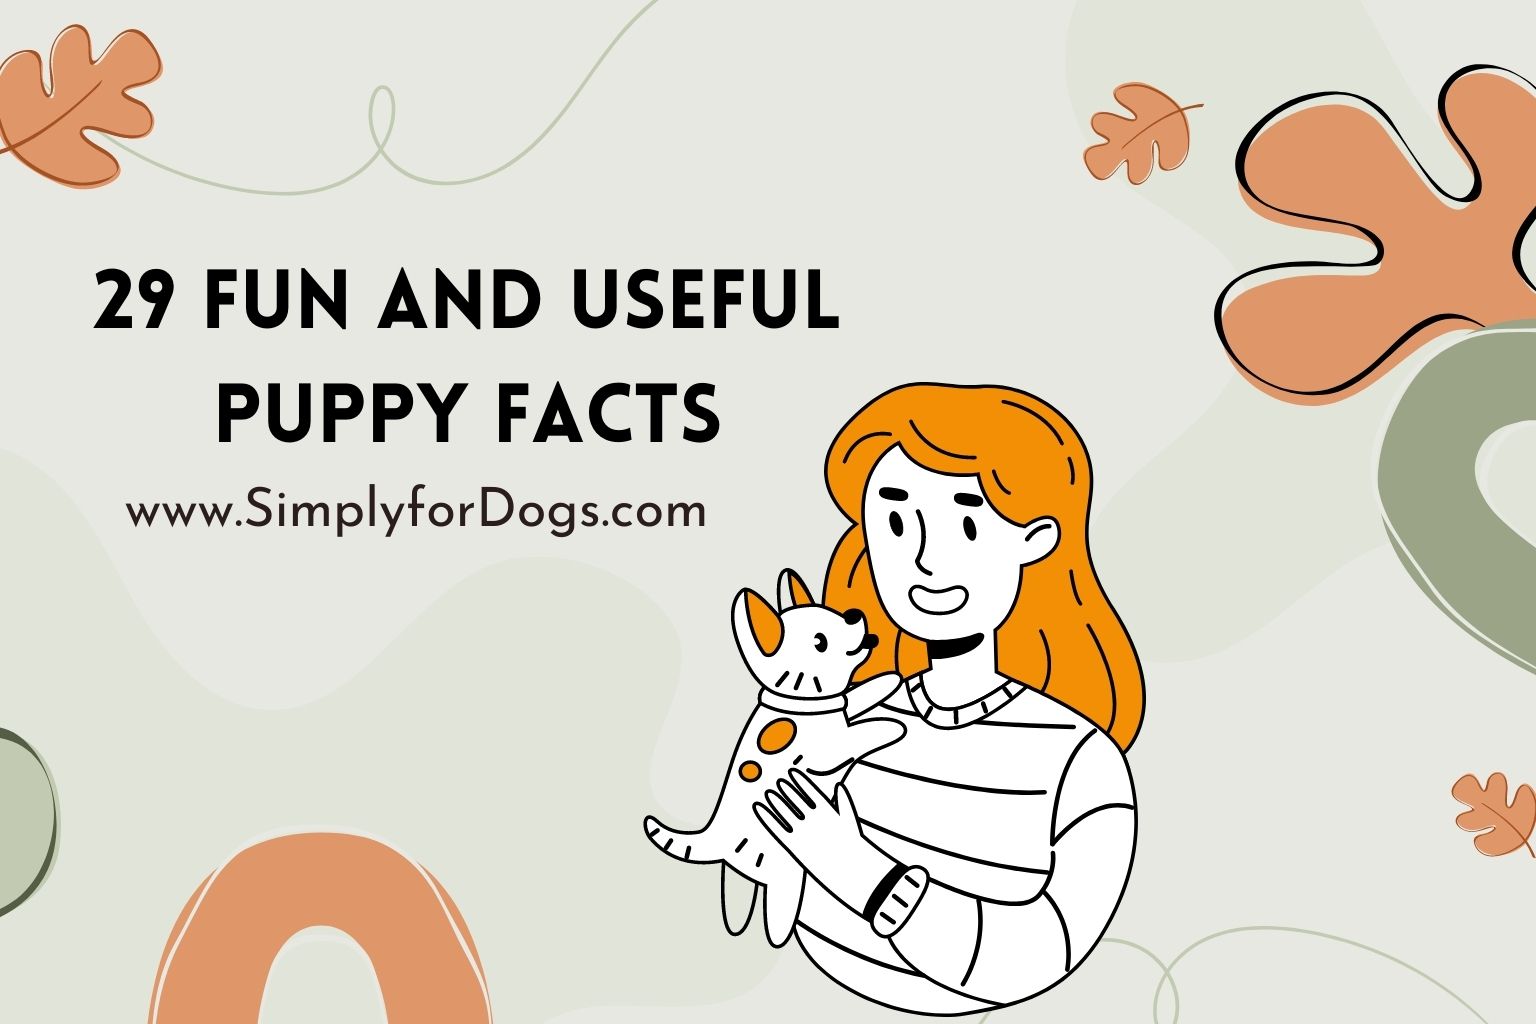 29 Fun and Useful Puppy Facts